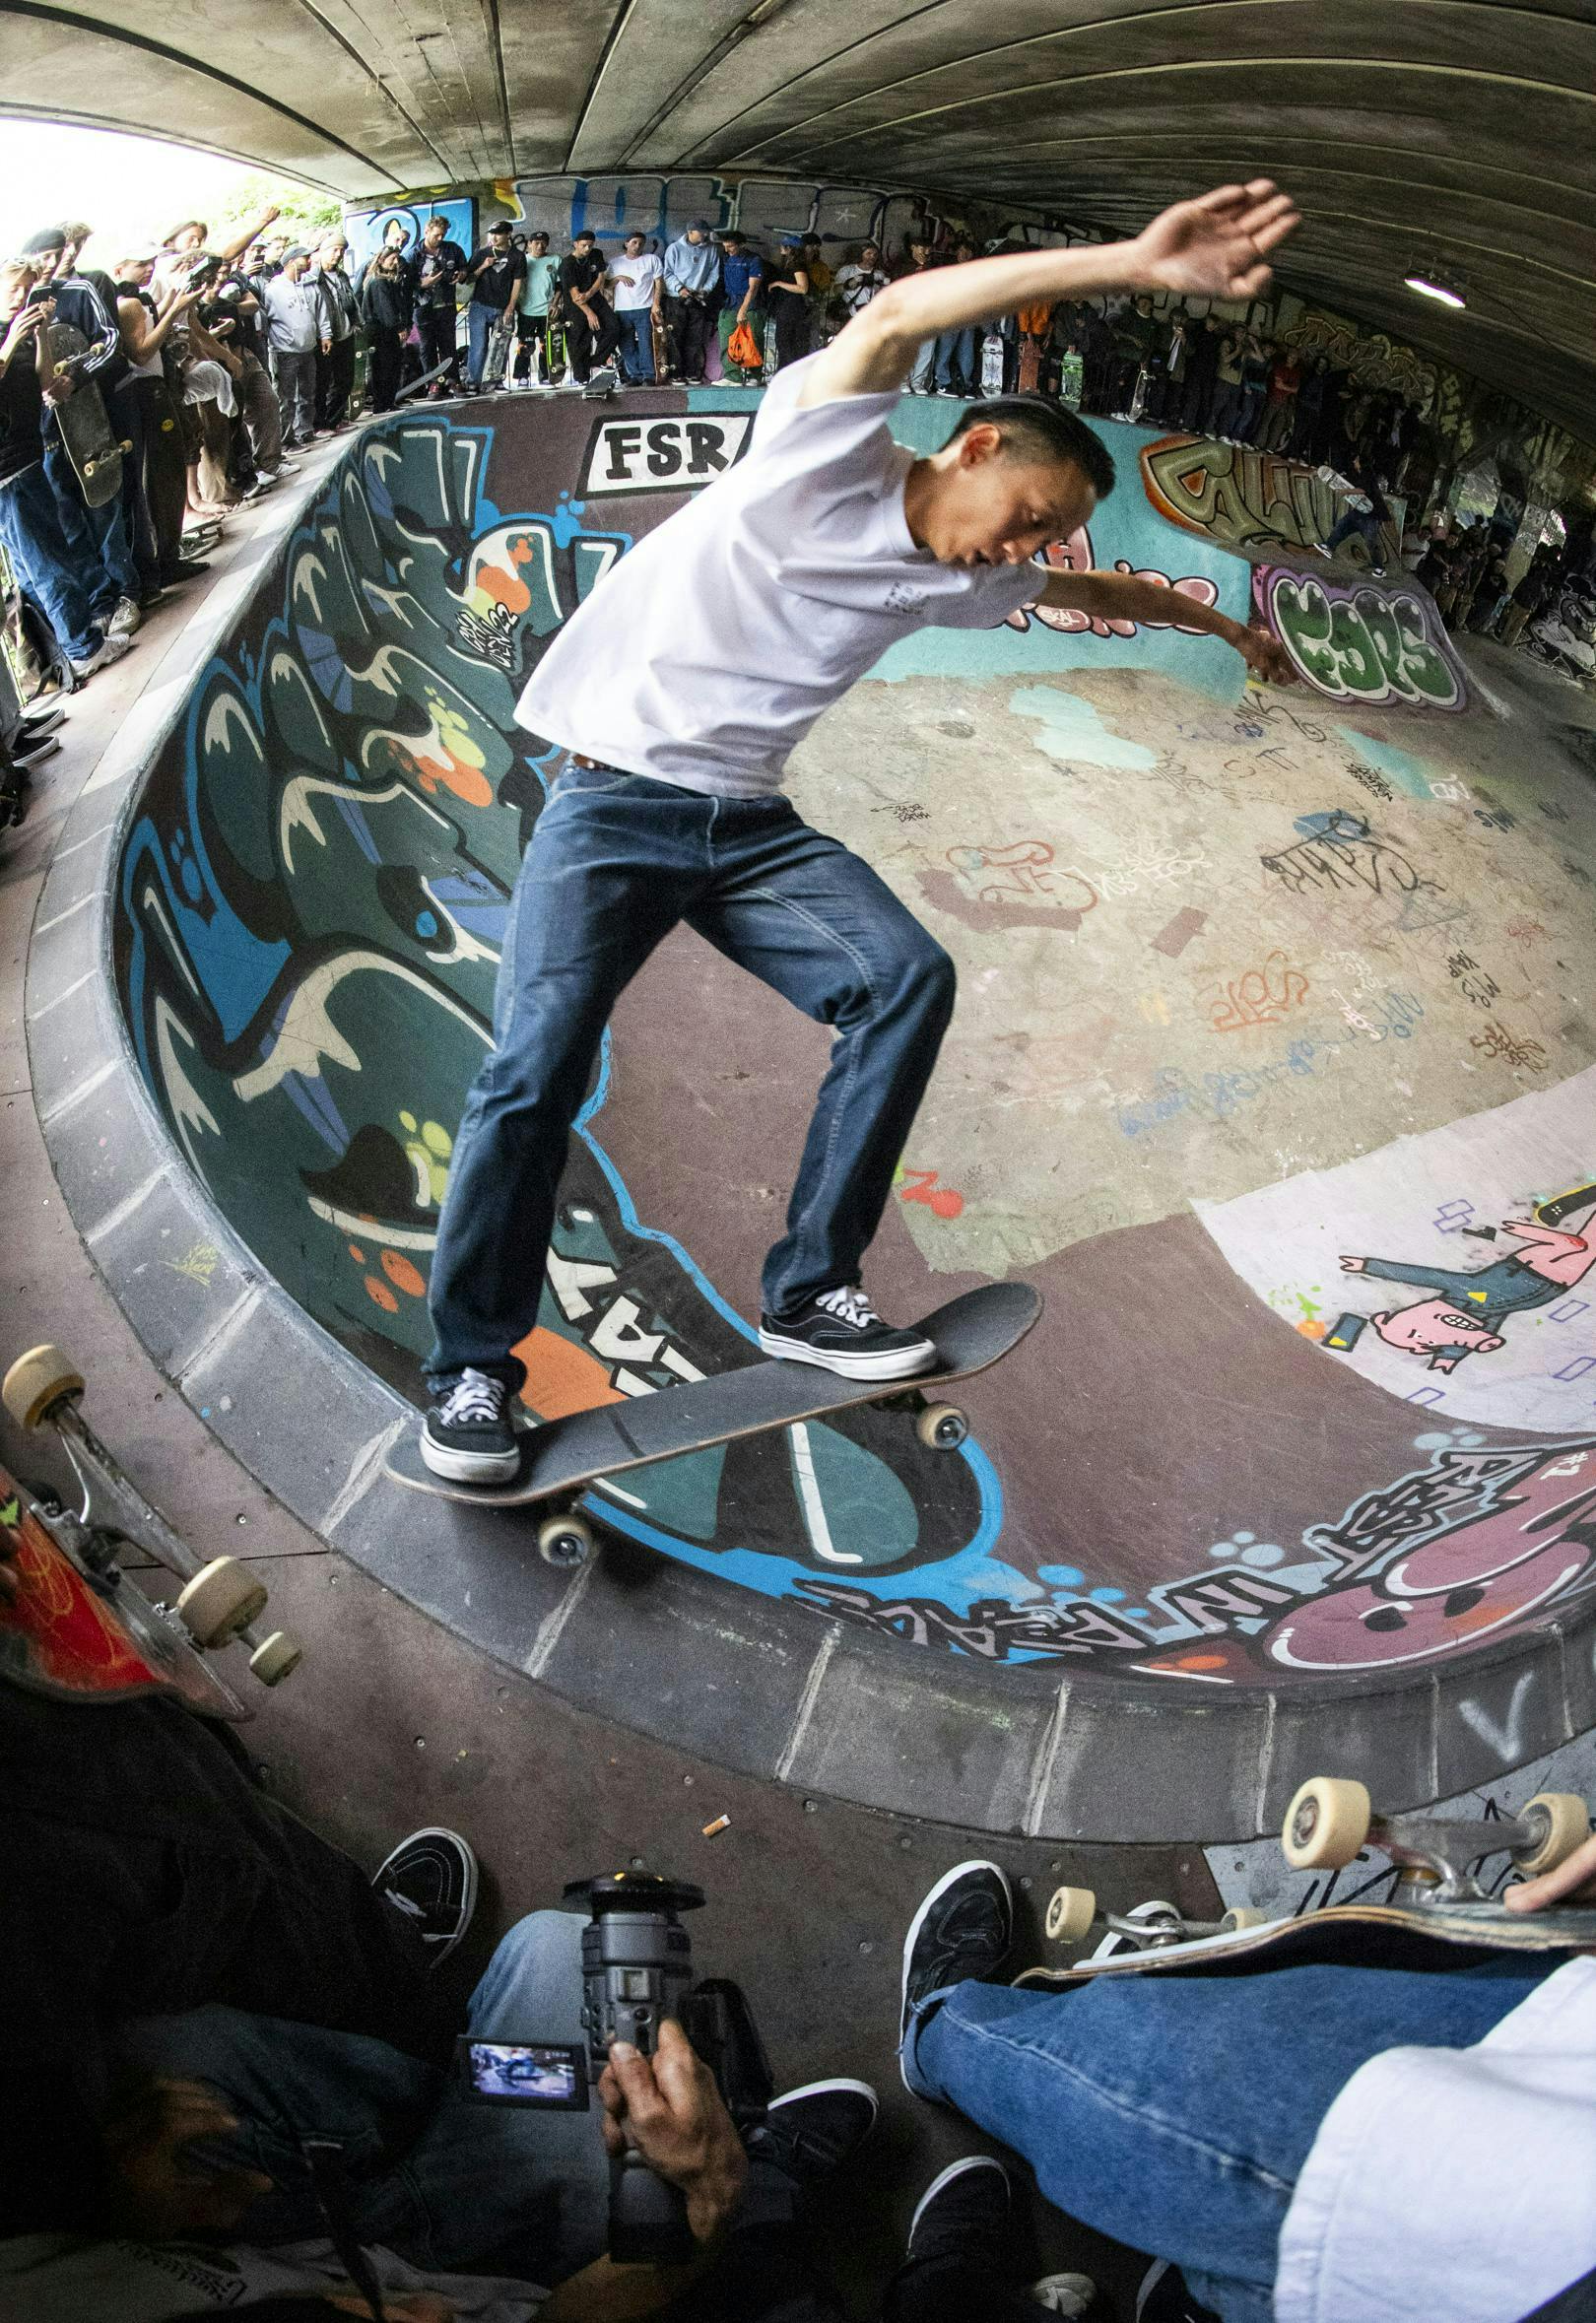 TAKESHI KAGEYAMA, FRONTSIDE 5-0, CPH OPEN  2022 / The attention Takeshi gets, the better his moves. 注目されればされるほど、タケシの動きは良くなる。